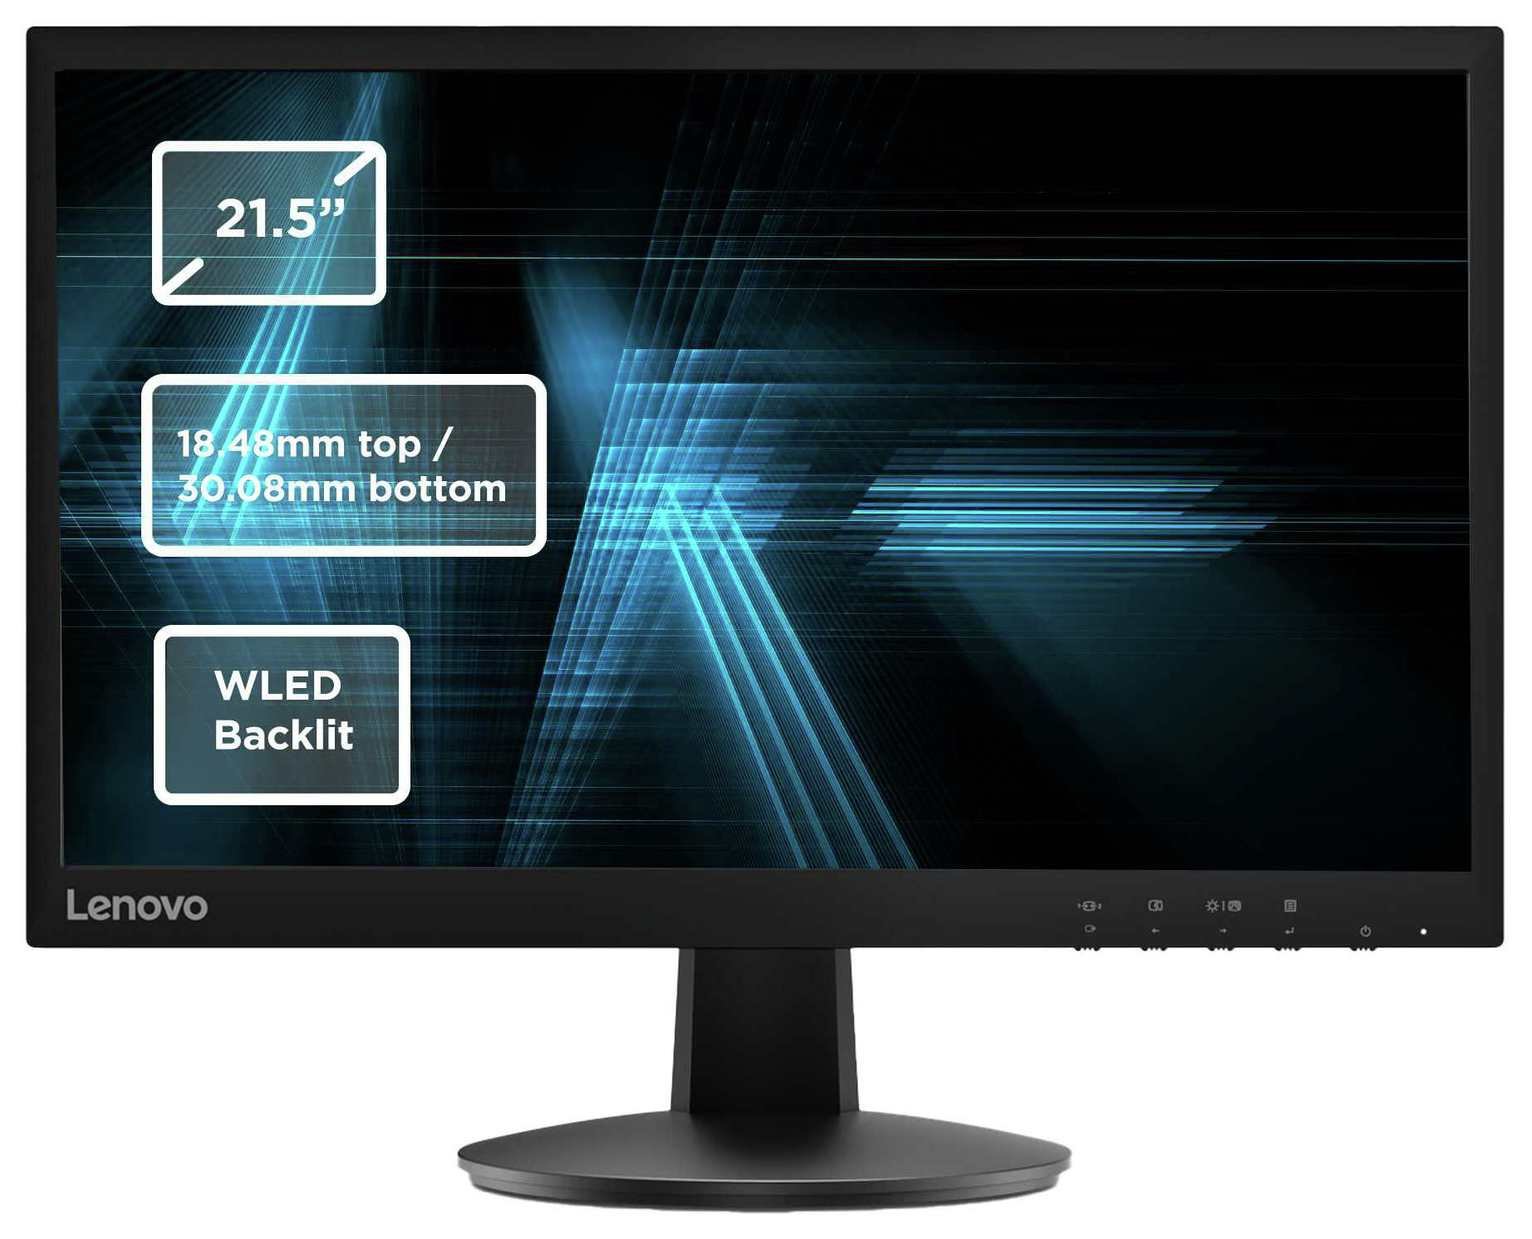 Lenovo C22-10 21.5in FHD Monitor Review